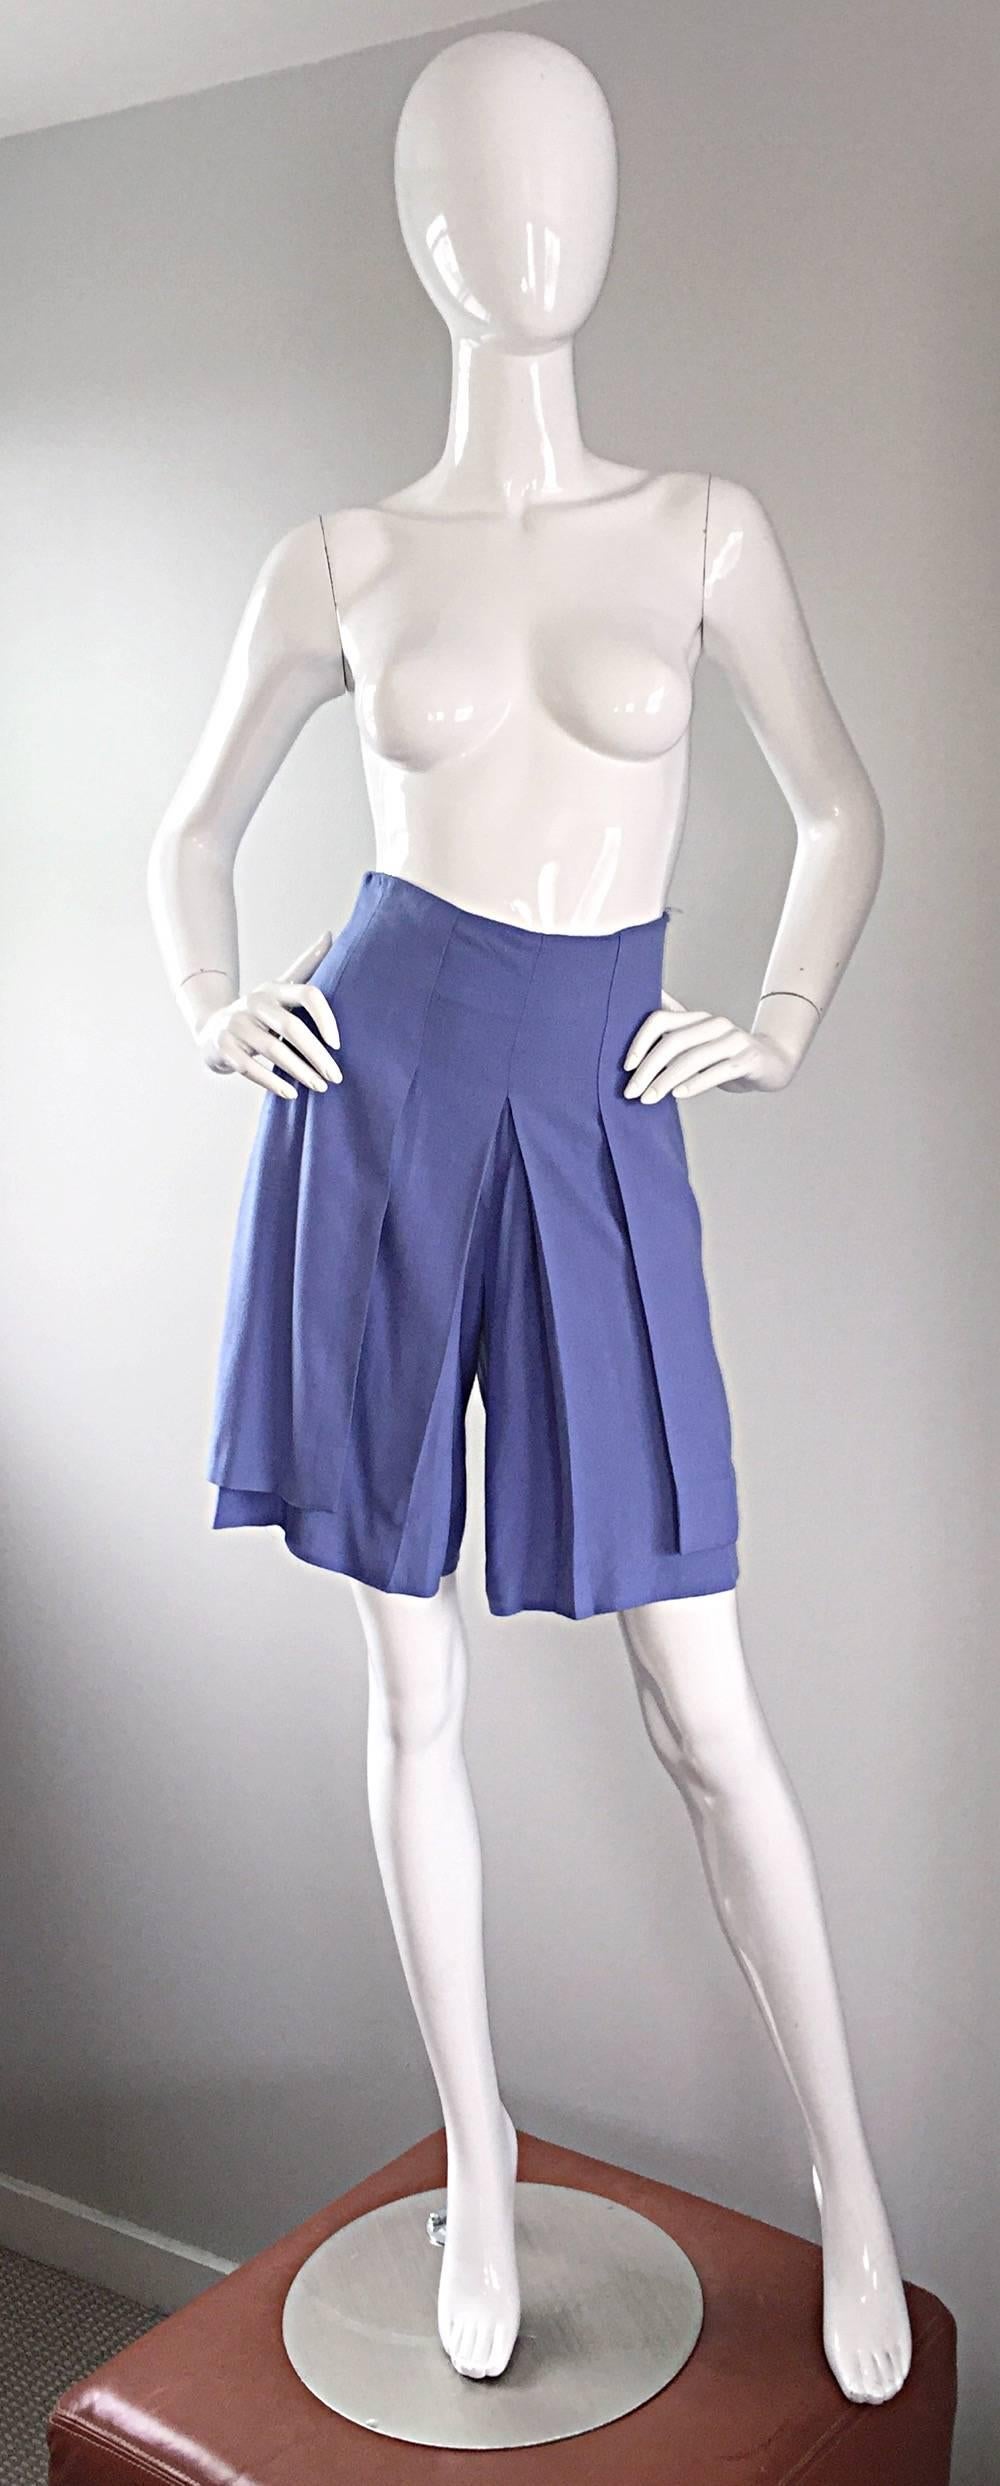 Chic late 80s vintage EMANUELLE KHANH high waist periwinkle blue shorts! Flattering high waist, with pleated details, that could pass for a skirt. Pockets at side waist. Can easily dress up or down. Great with a tucked in blouse, and sandals or